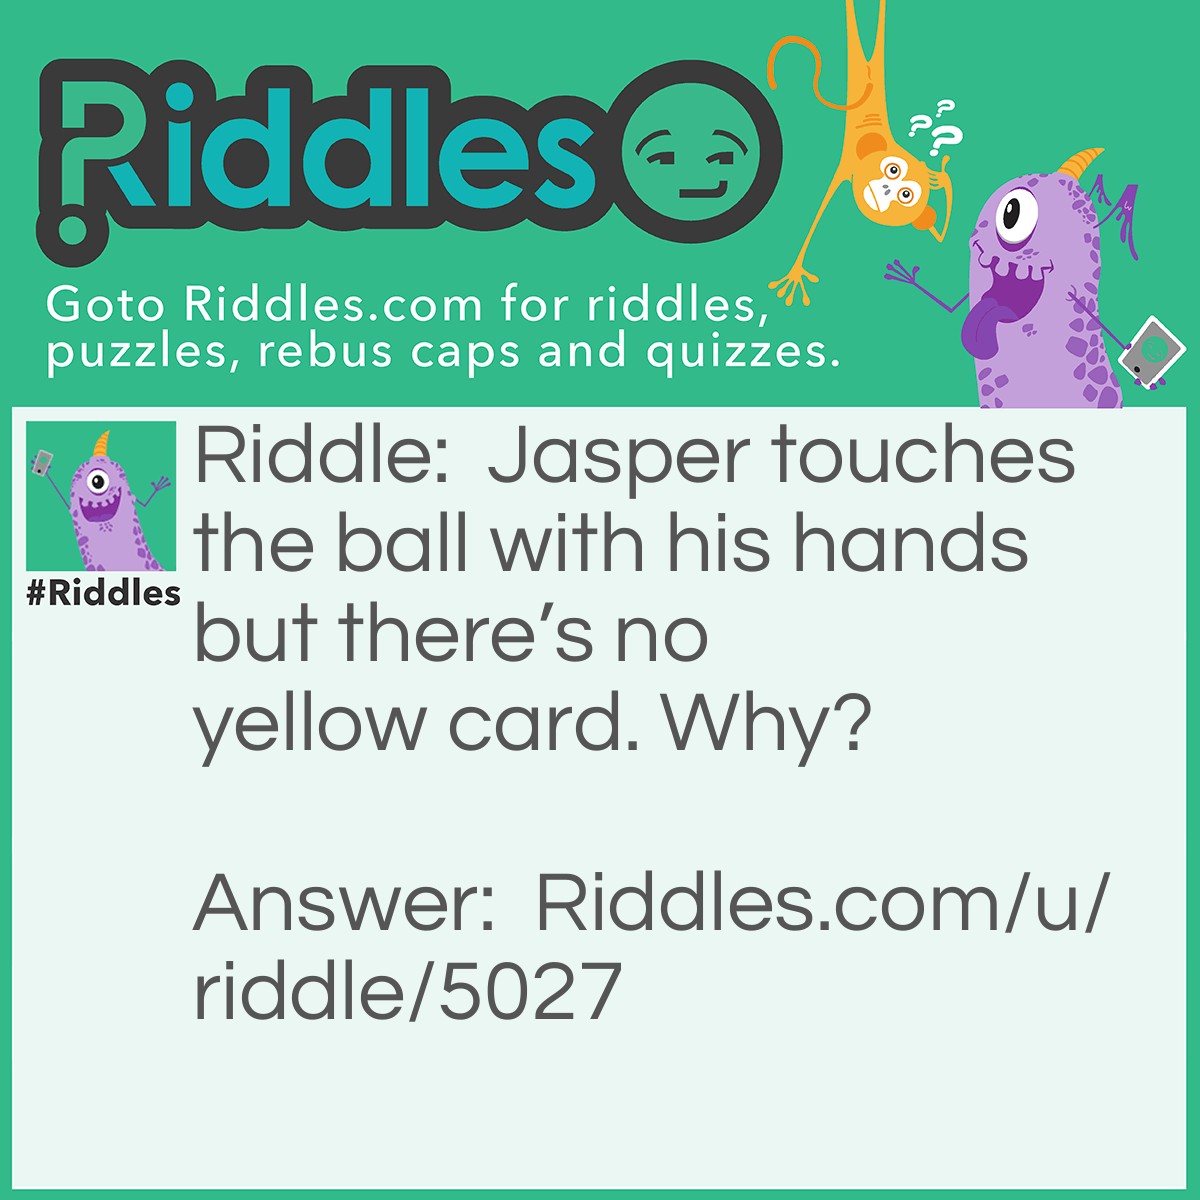 Riddle: Jasper touches the ball with his hands but there's no yellow card. Why? Answer: He's the goalie.